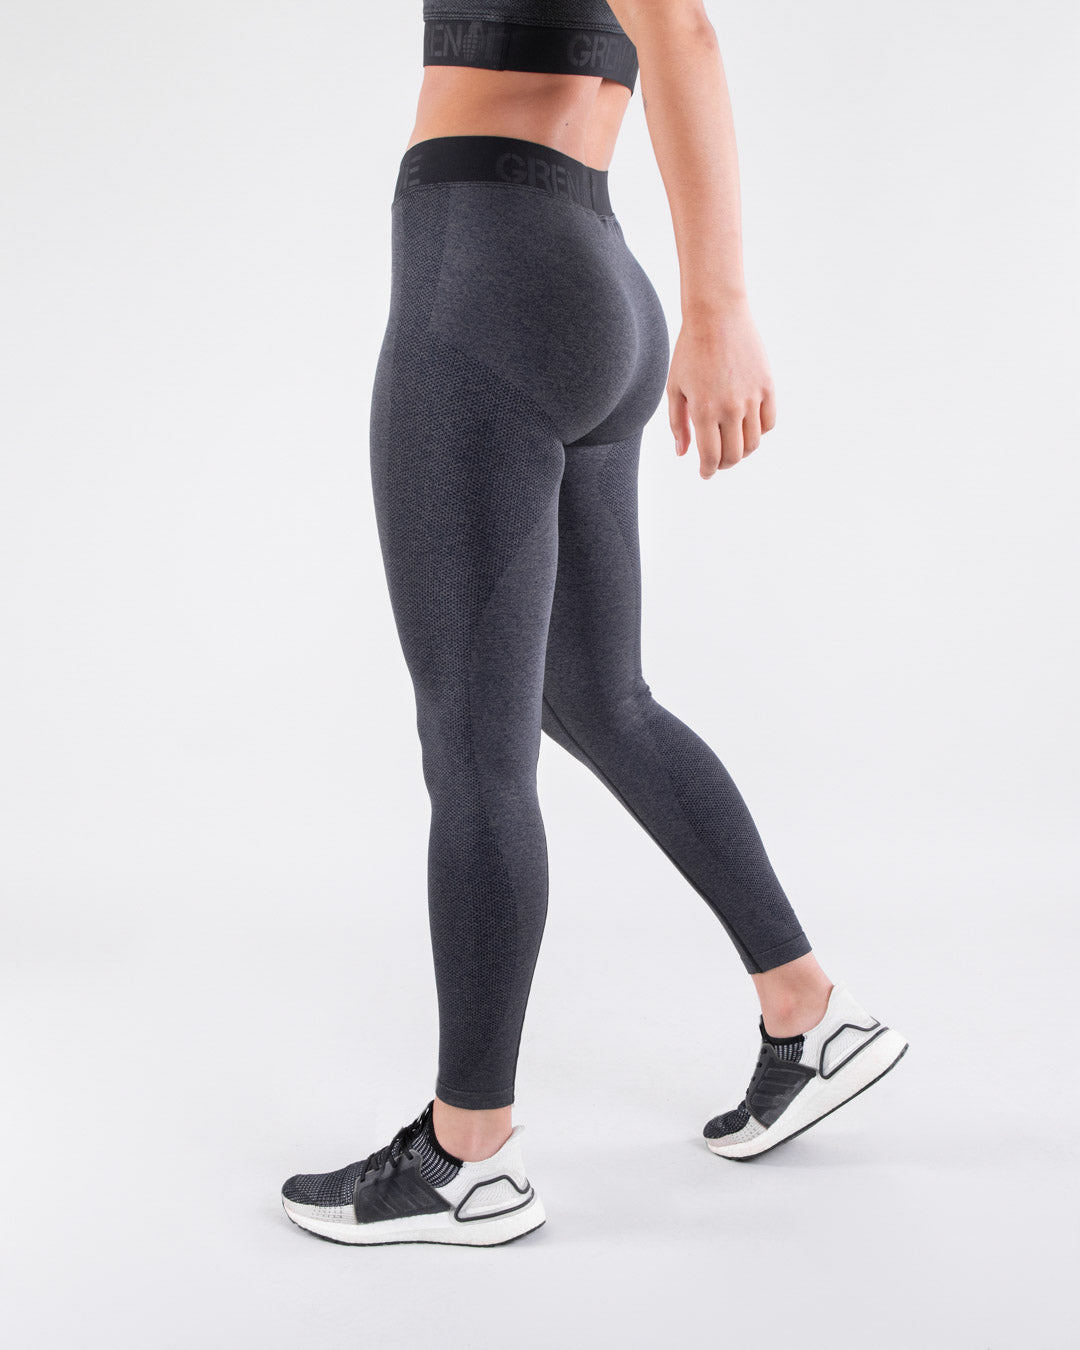 Women's Seamless Collection, Gym Clothing